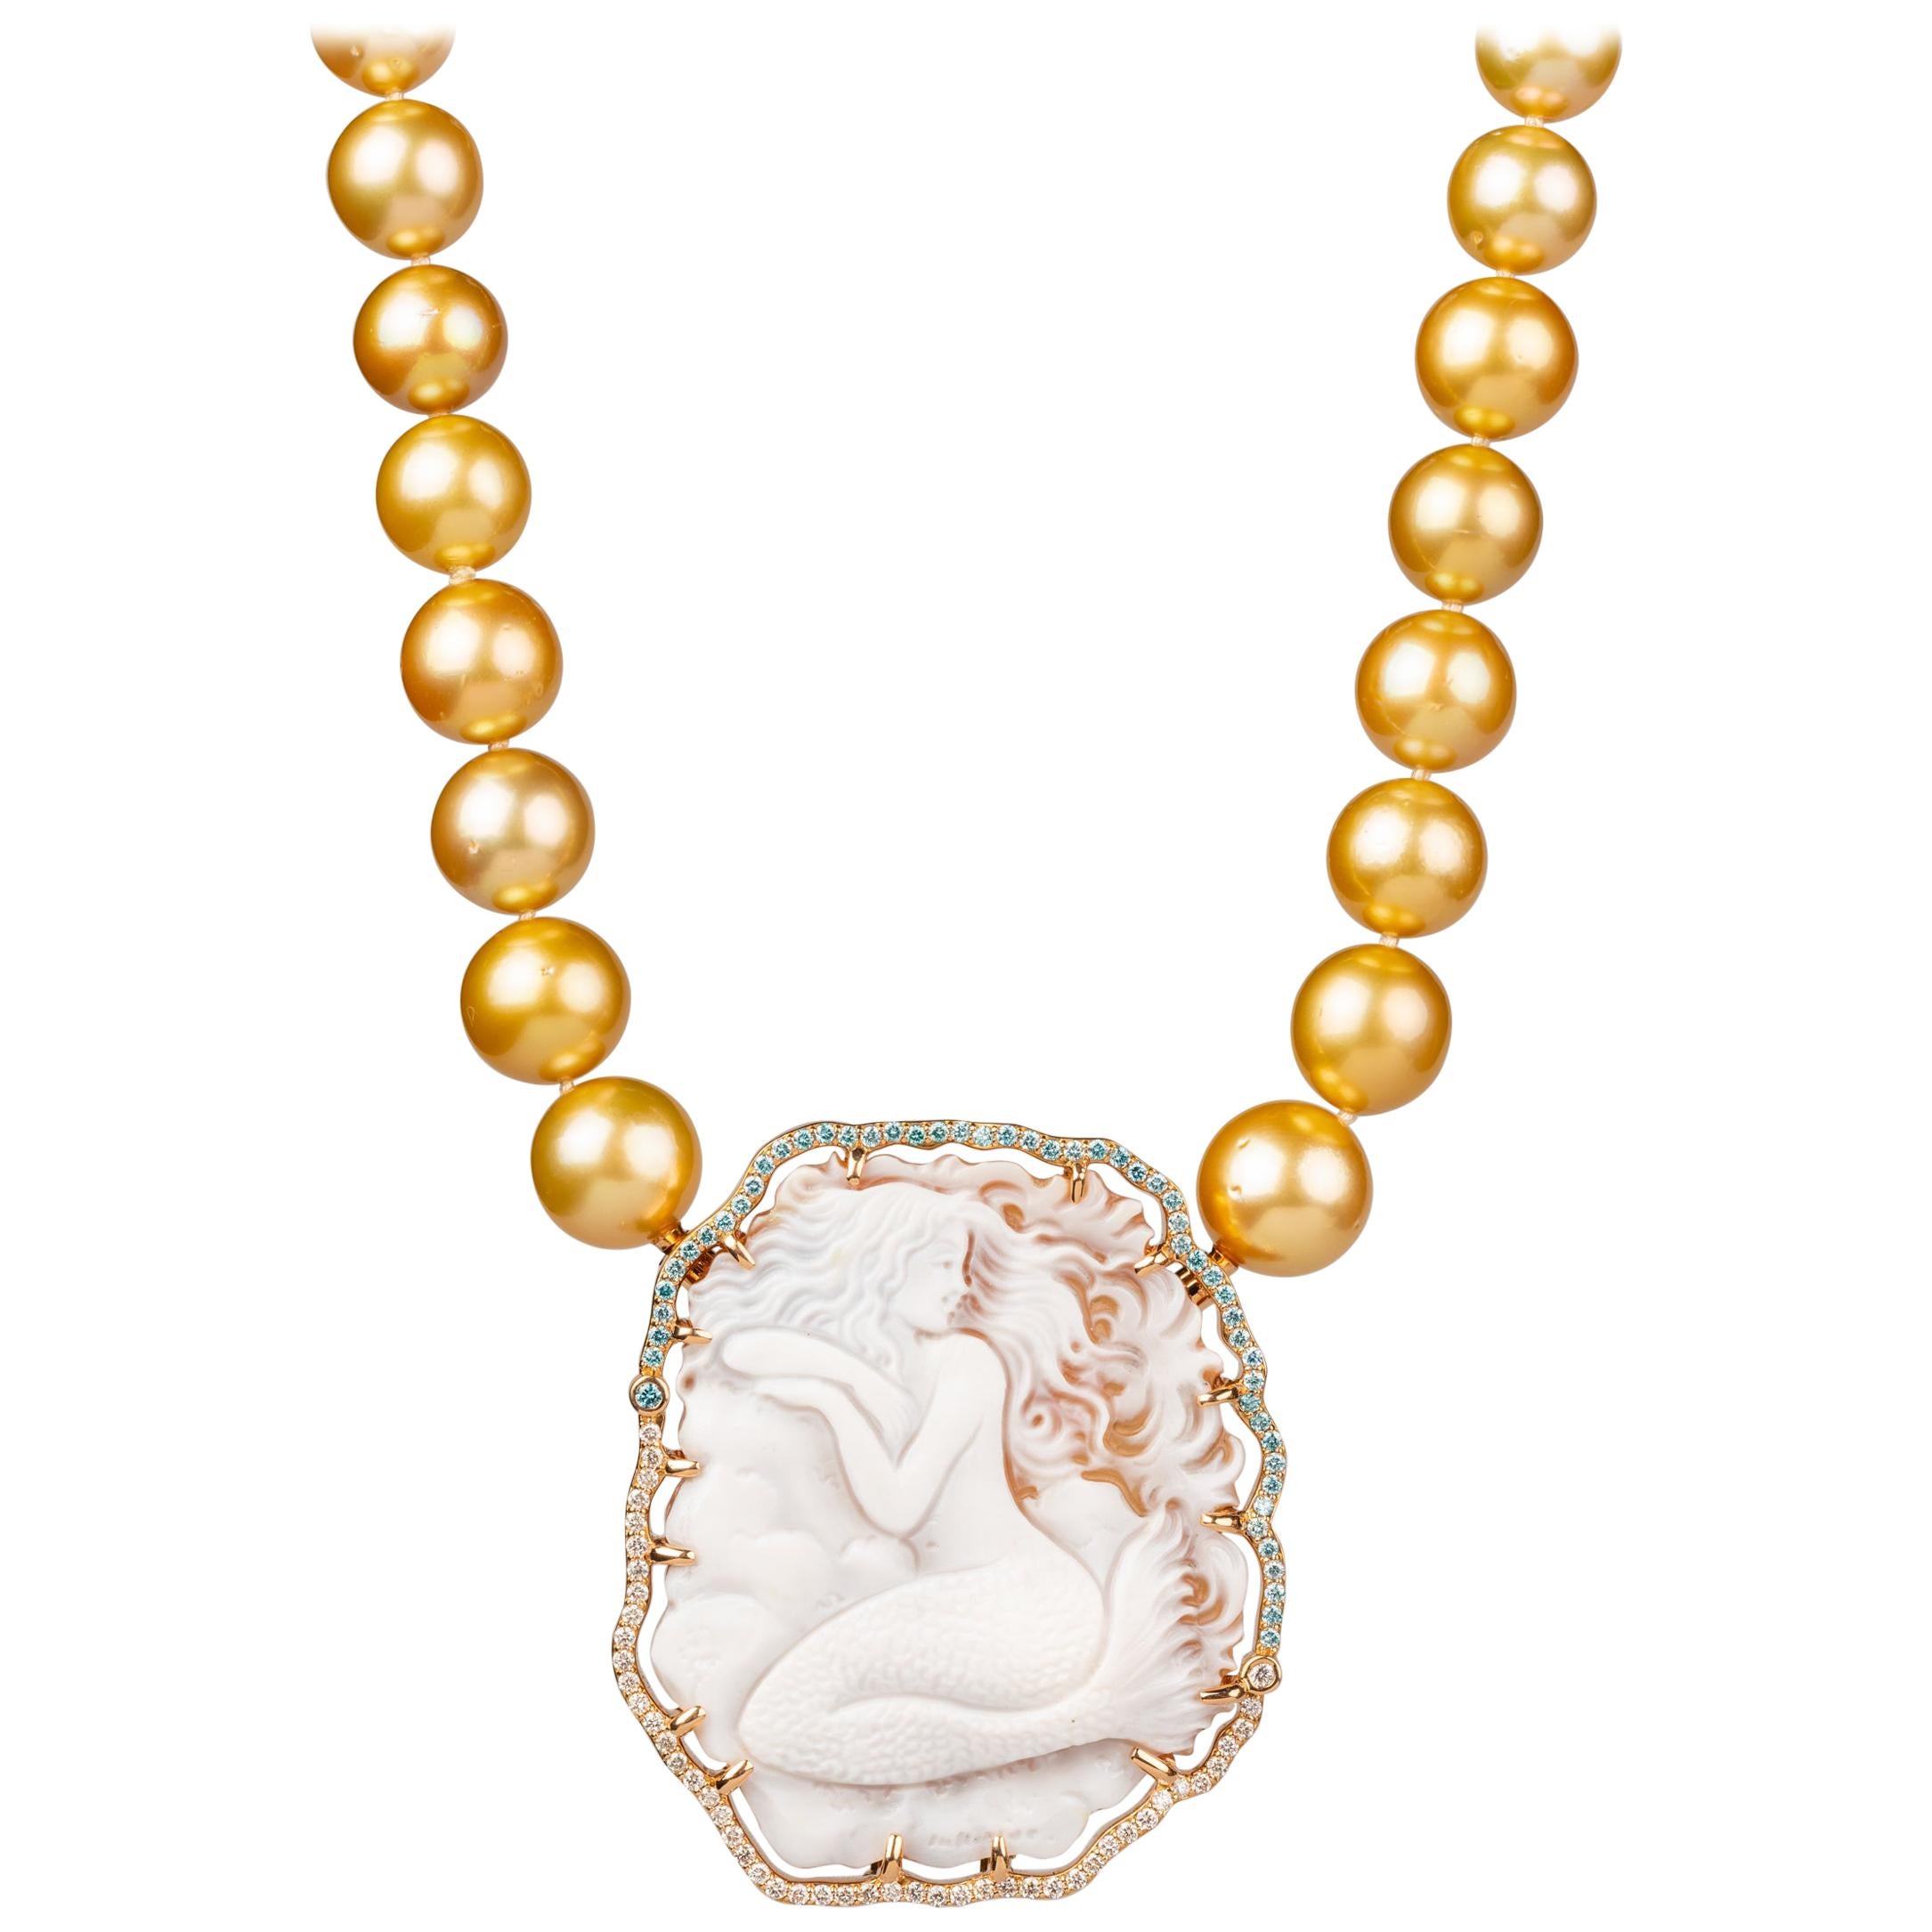 South Sea Golden Pearl Necklace with Mermaid Cameo Clasp and Brooch For Sale